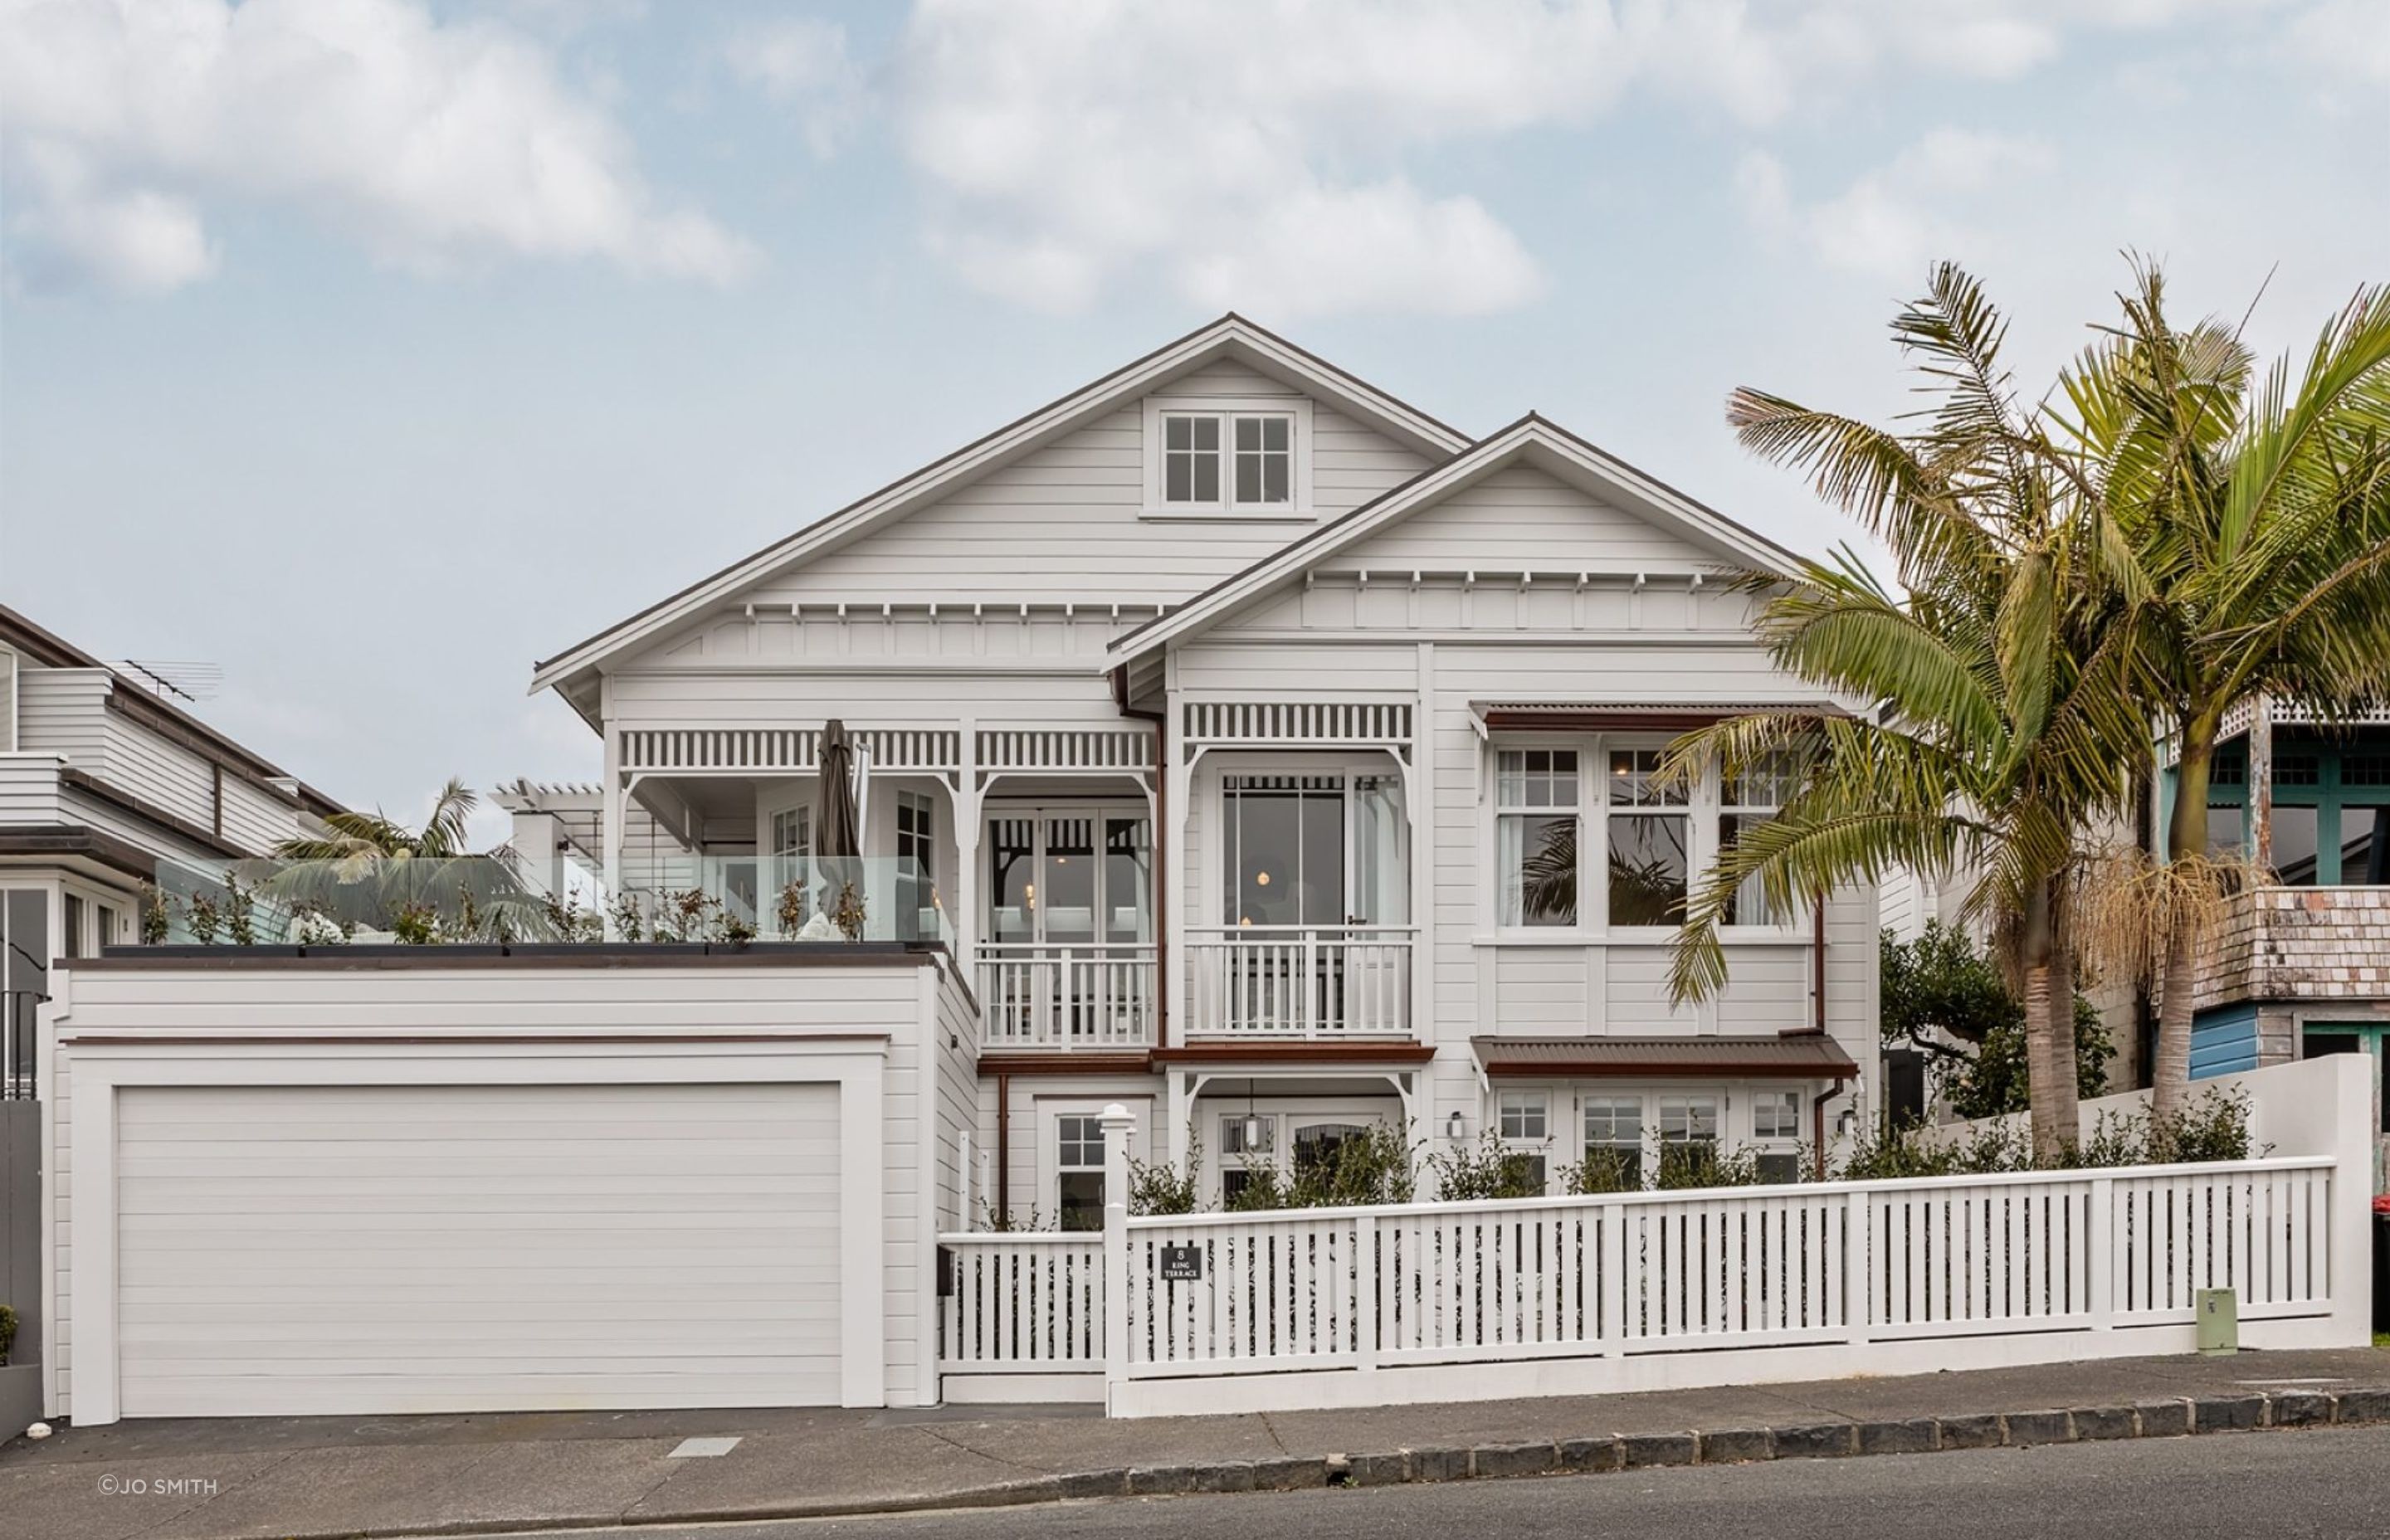 The restored house in St Marys Bay is a villa-bungalow hybrid. The corner bay within the verandah and double-hung windows are villa features, while the gable ends and front bay window are bungalow features.